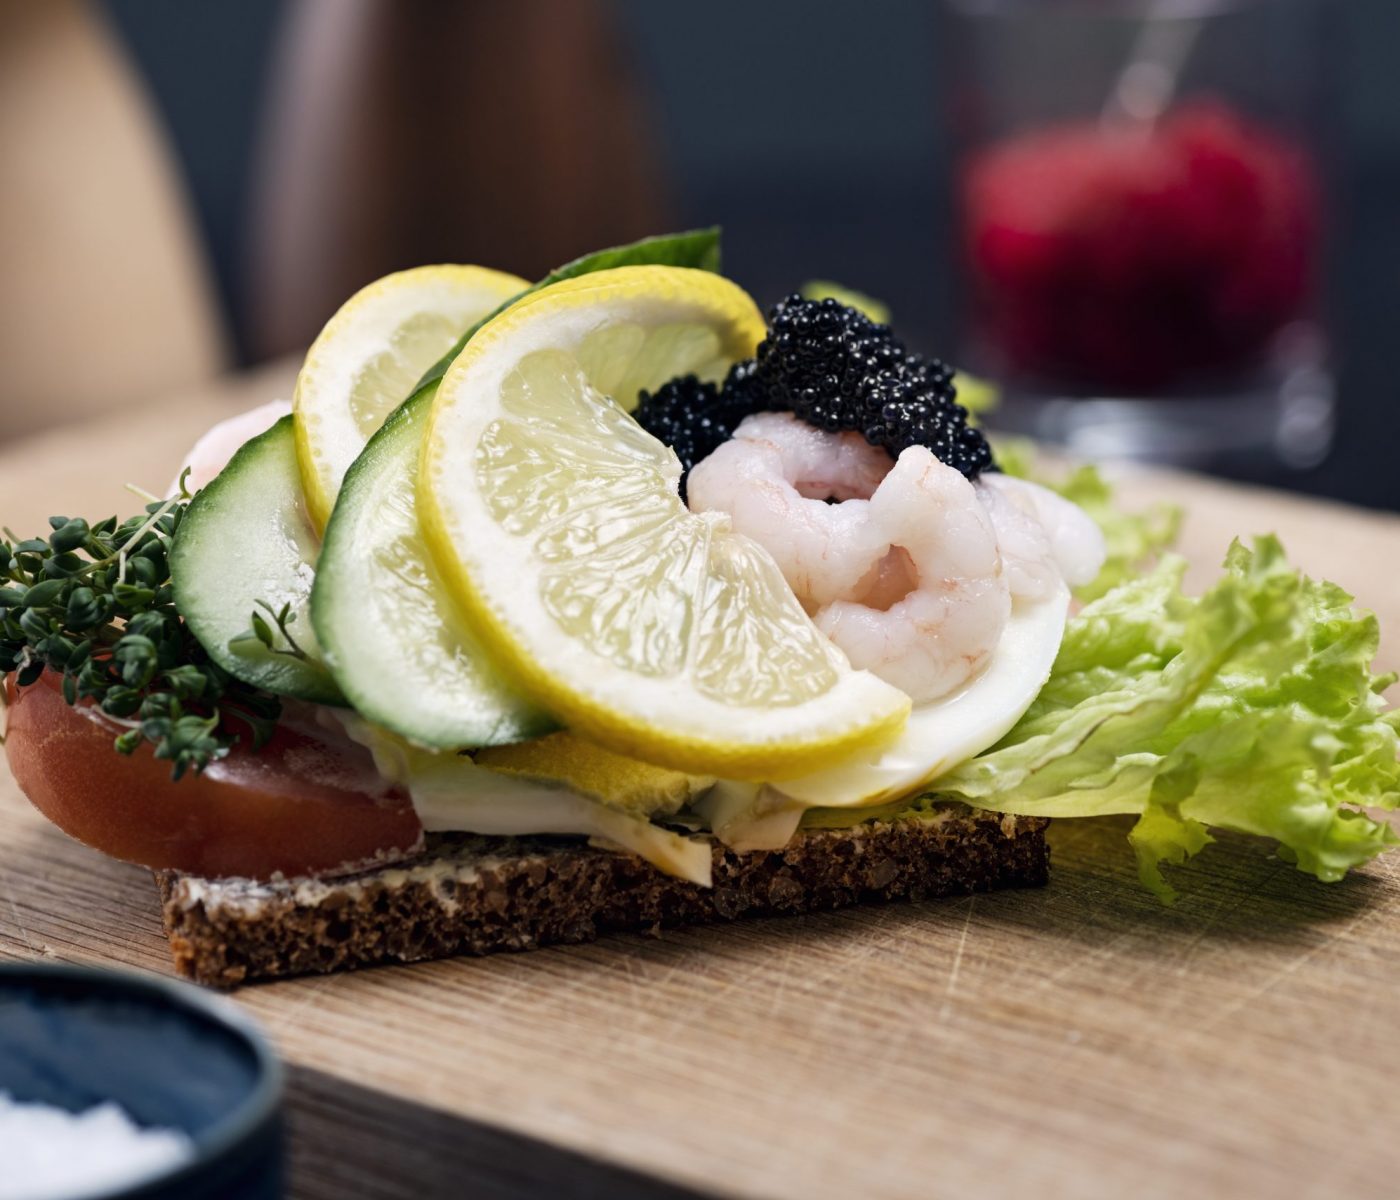 Smørrebrød is a traditional open faced sandwich made with dark rye bread with various cold toppings. Toppings range from egg, smoked fish to cold meats with various pickles and herbs added. Traditionally eaten at lunchtime or occasionally at the end of a party. Egg with prawn and caviar, colour, horizontal with some copy space.